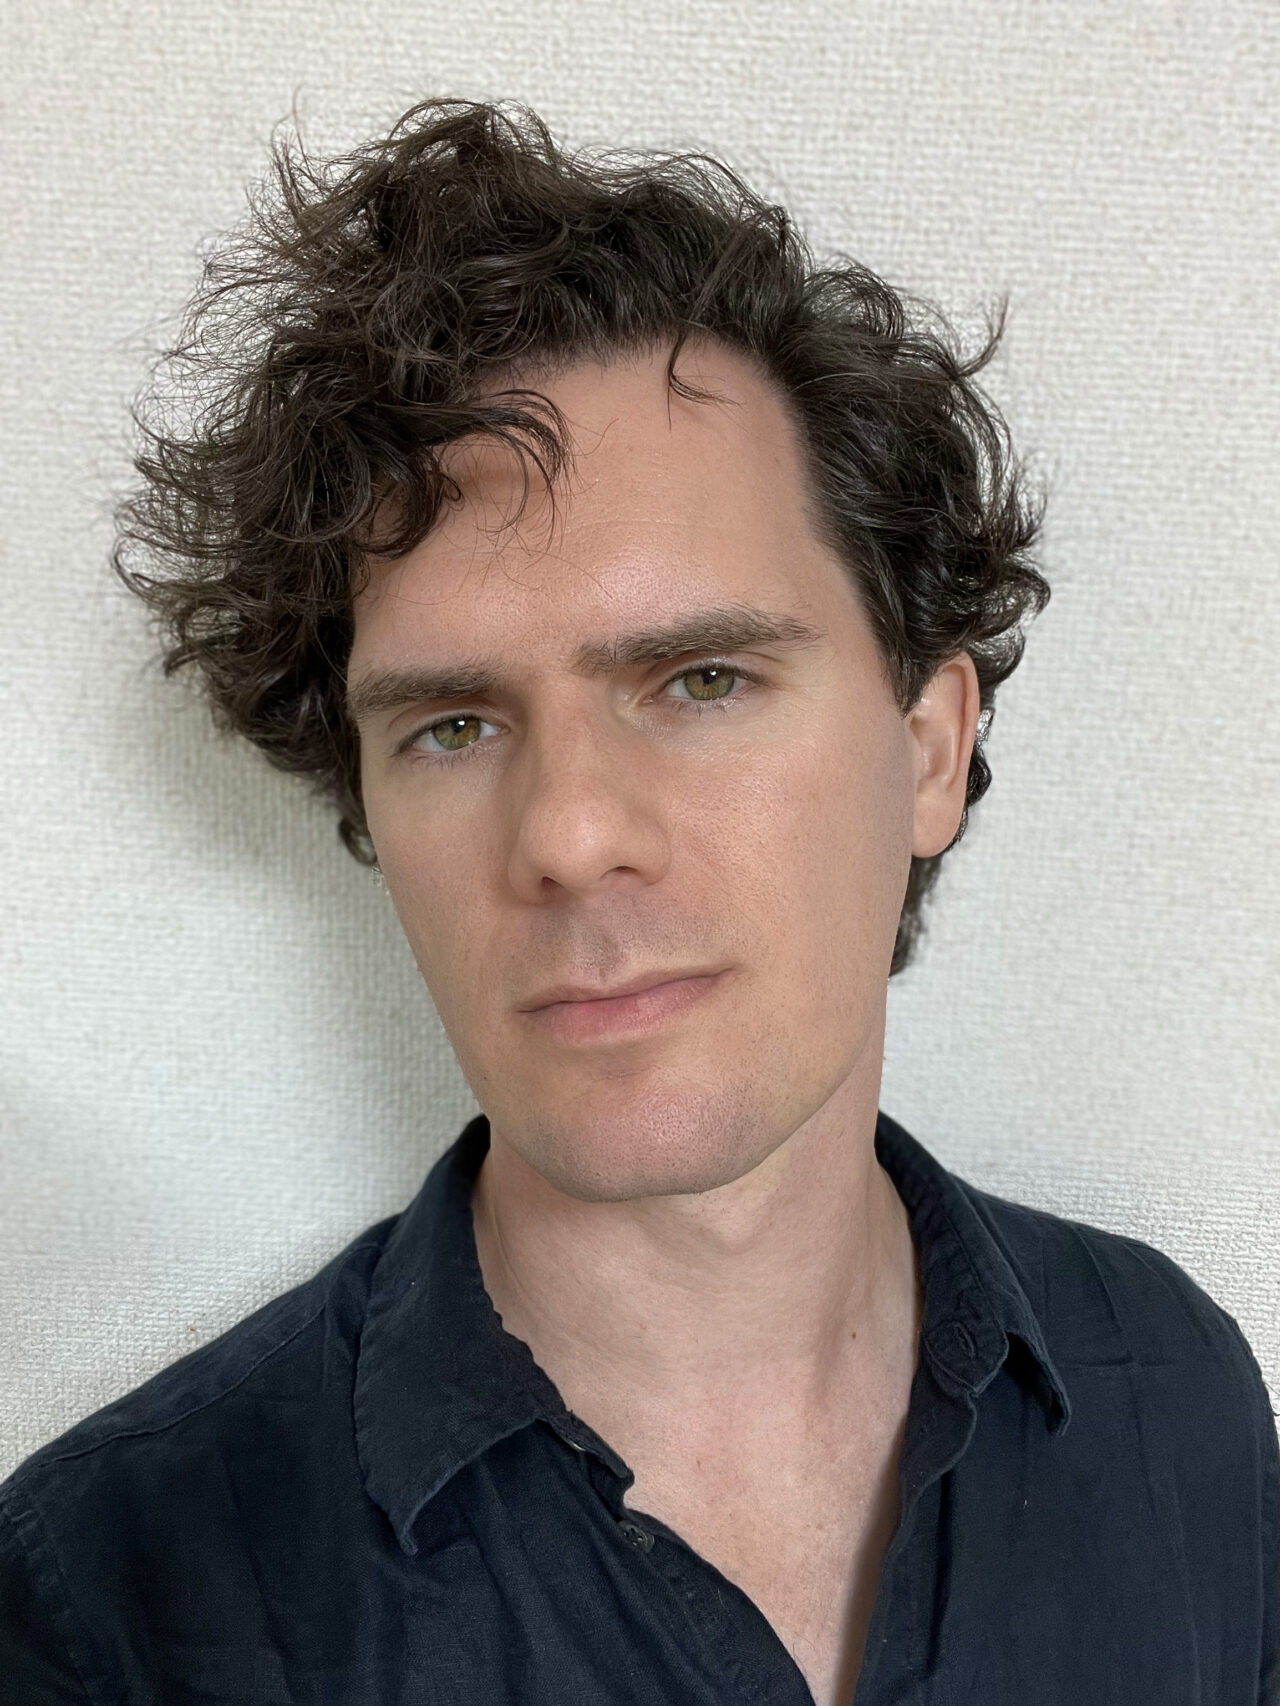 Self-portrait of artist Kyle McDonald. Mid-30s white male with short wavy brown hair, neutral face expression, clean shaven, collared black t-shirt, against a white background.